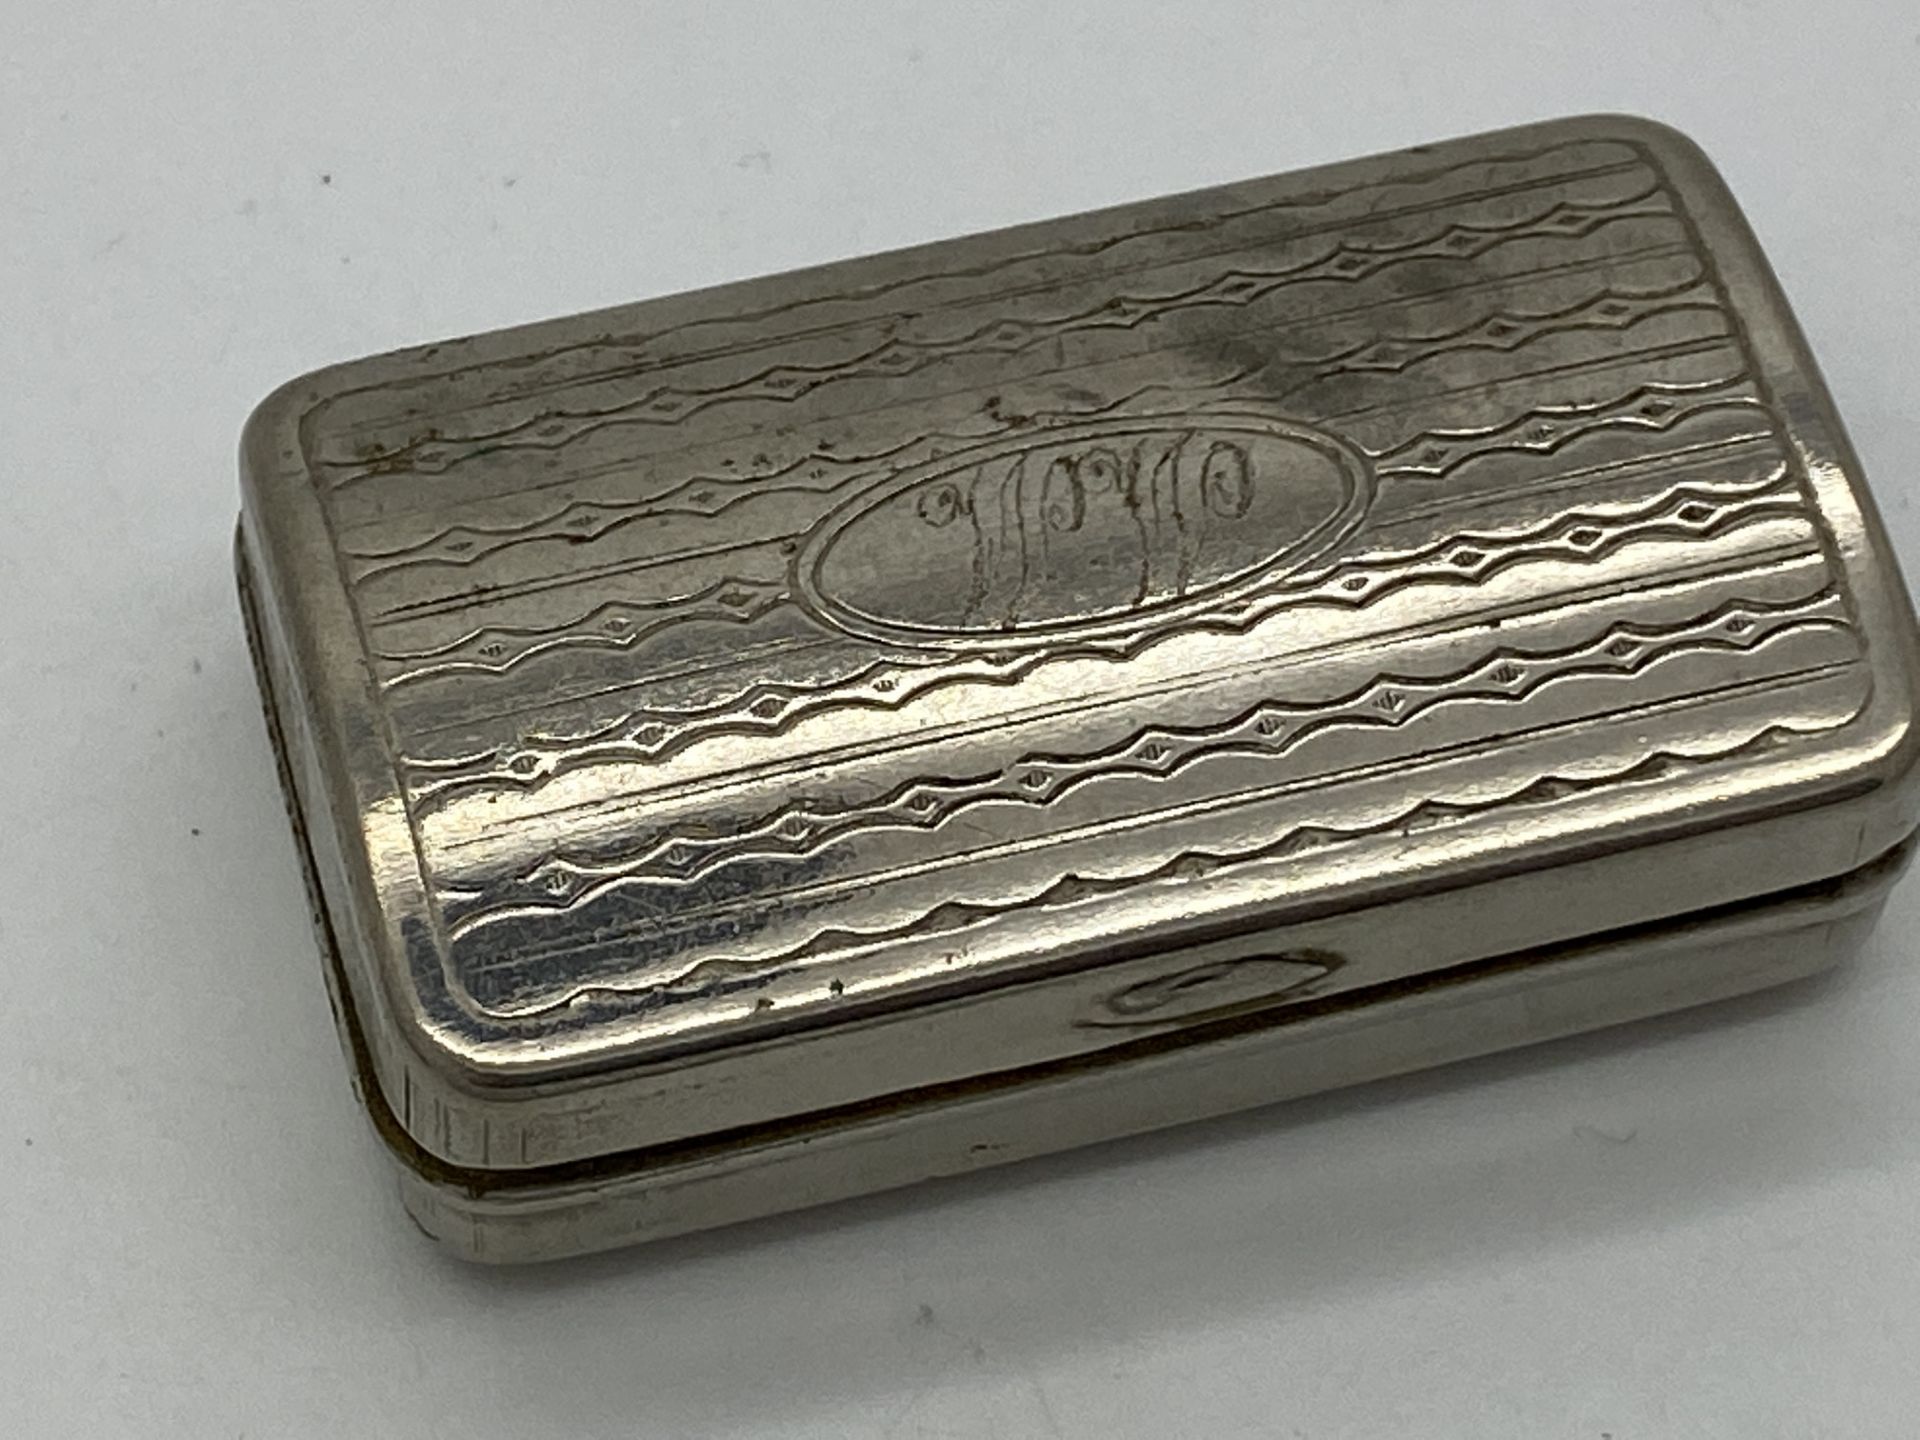 VINTAGE METAL CIGARETTE CASE 1 x OTHER METAL SNUFF BOX - Image 7 of 8